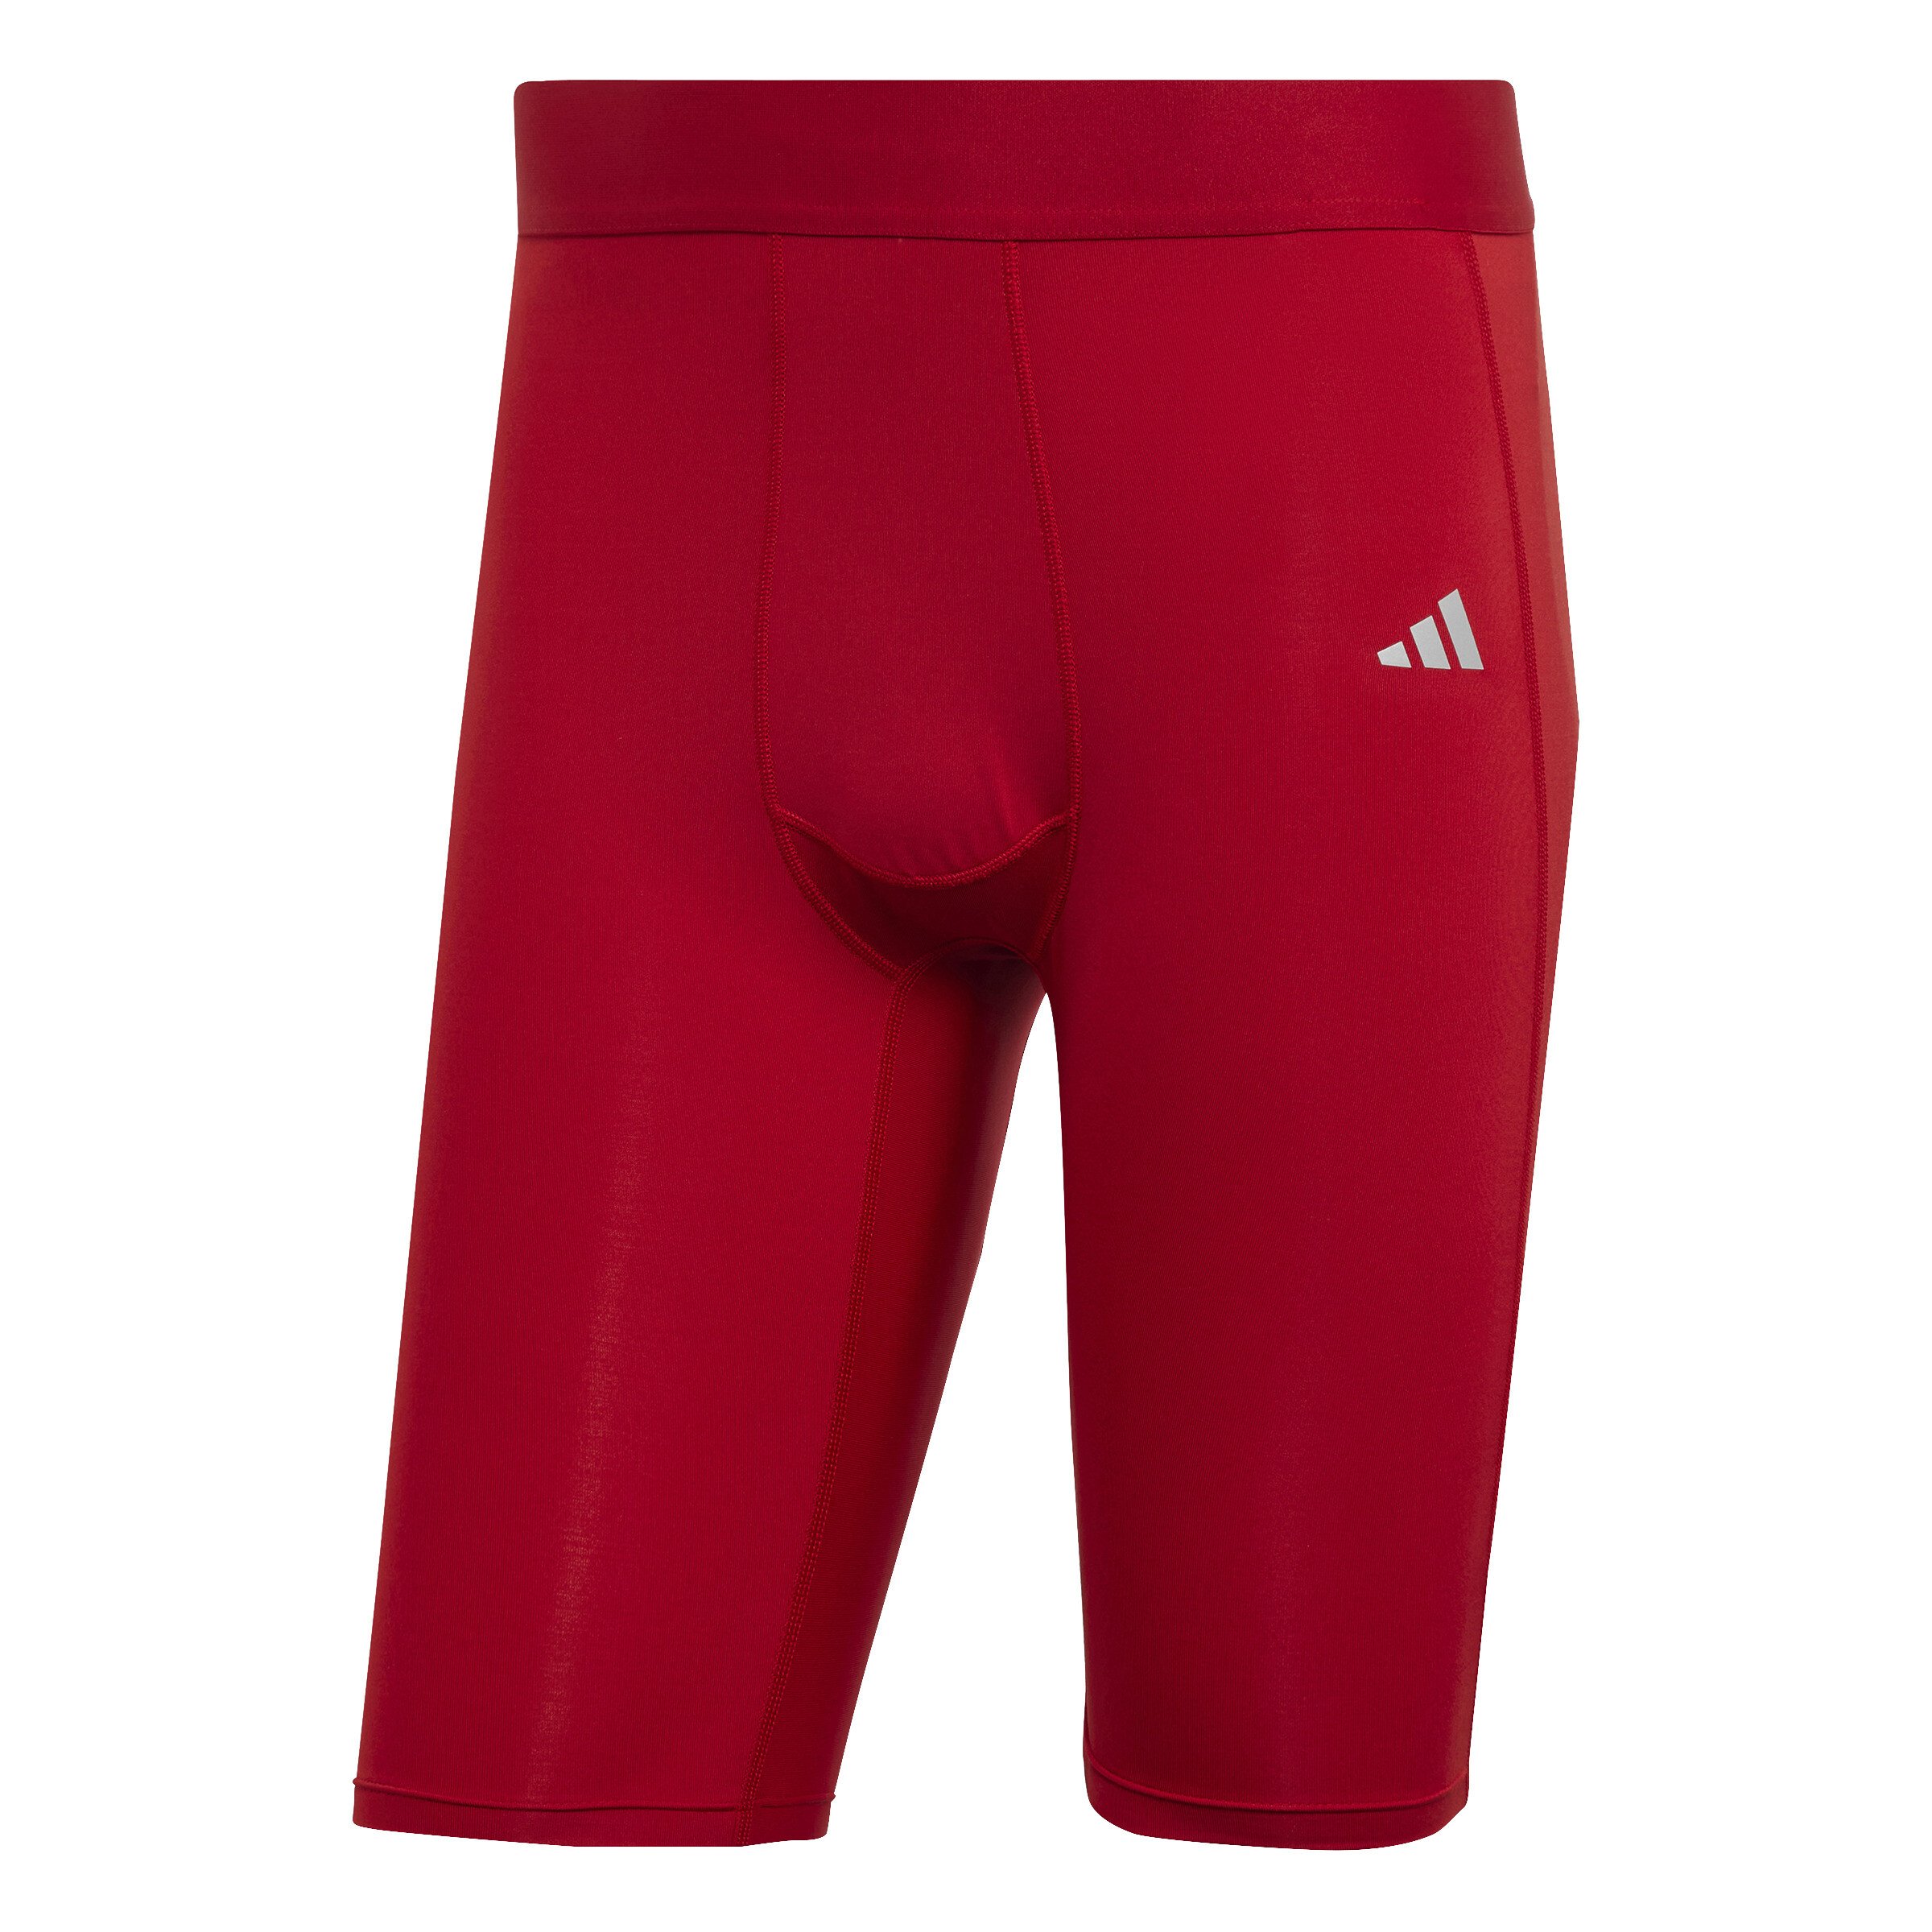 Adidas Techfit Short Tights - Team Power Red 2 - Total Football Direct